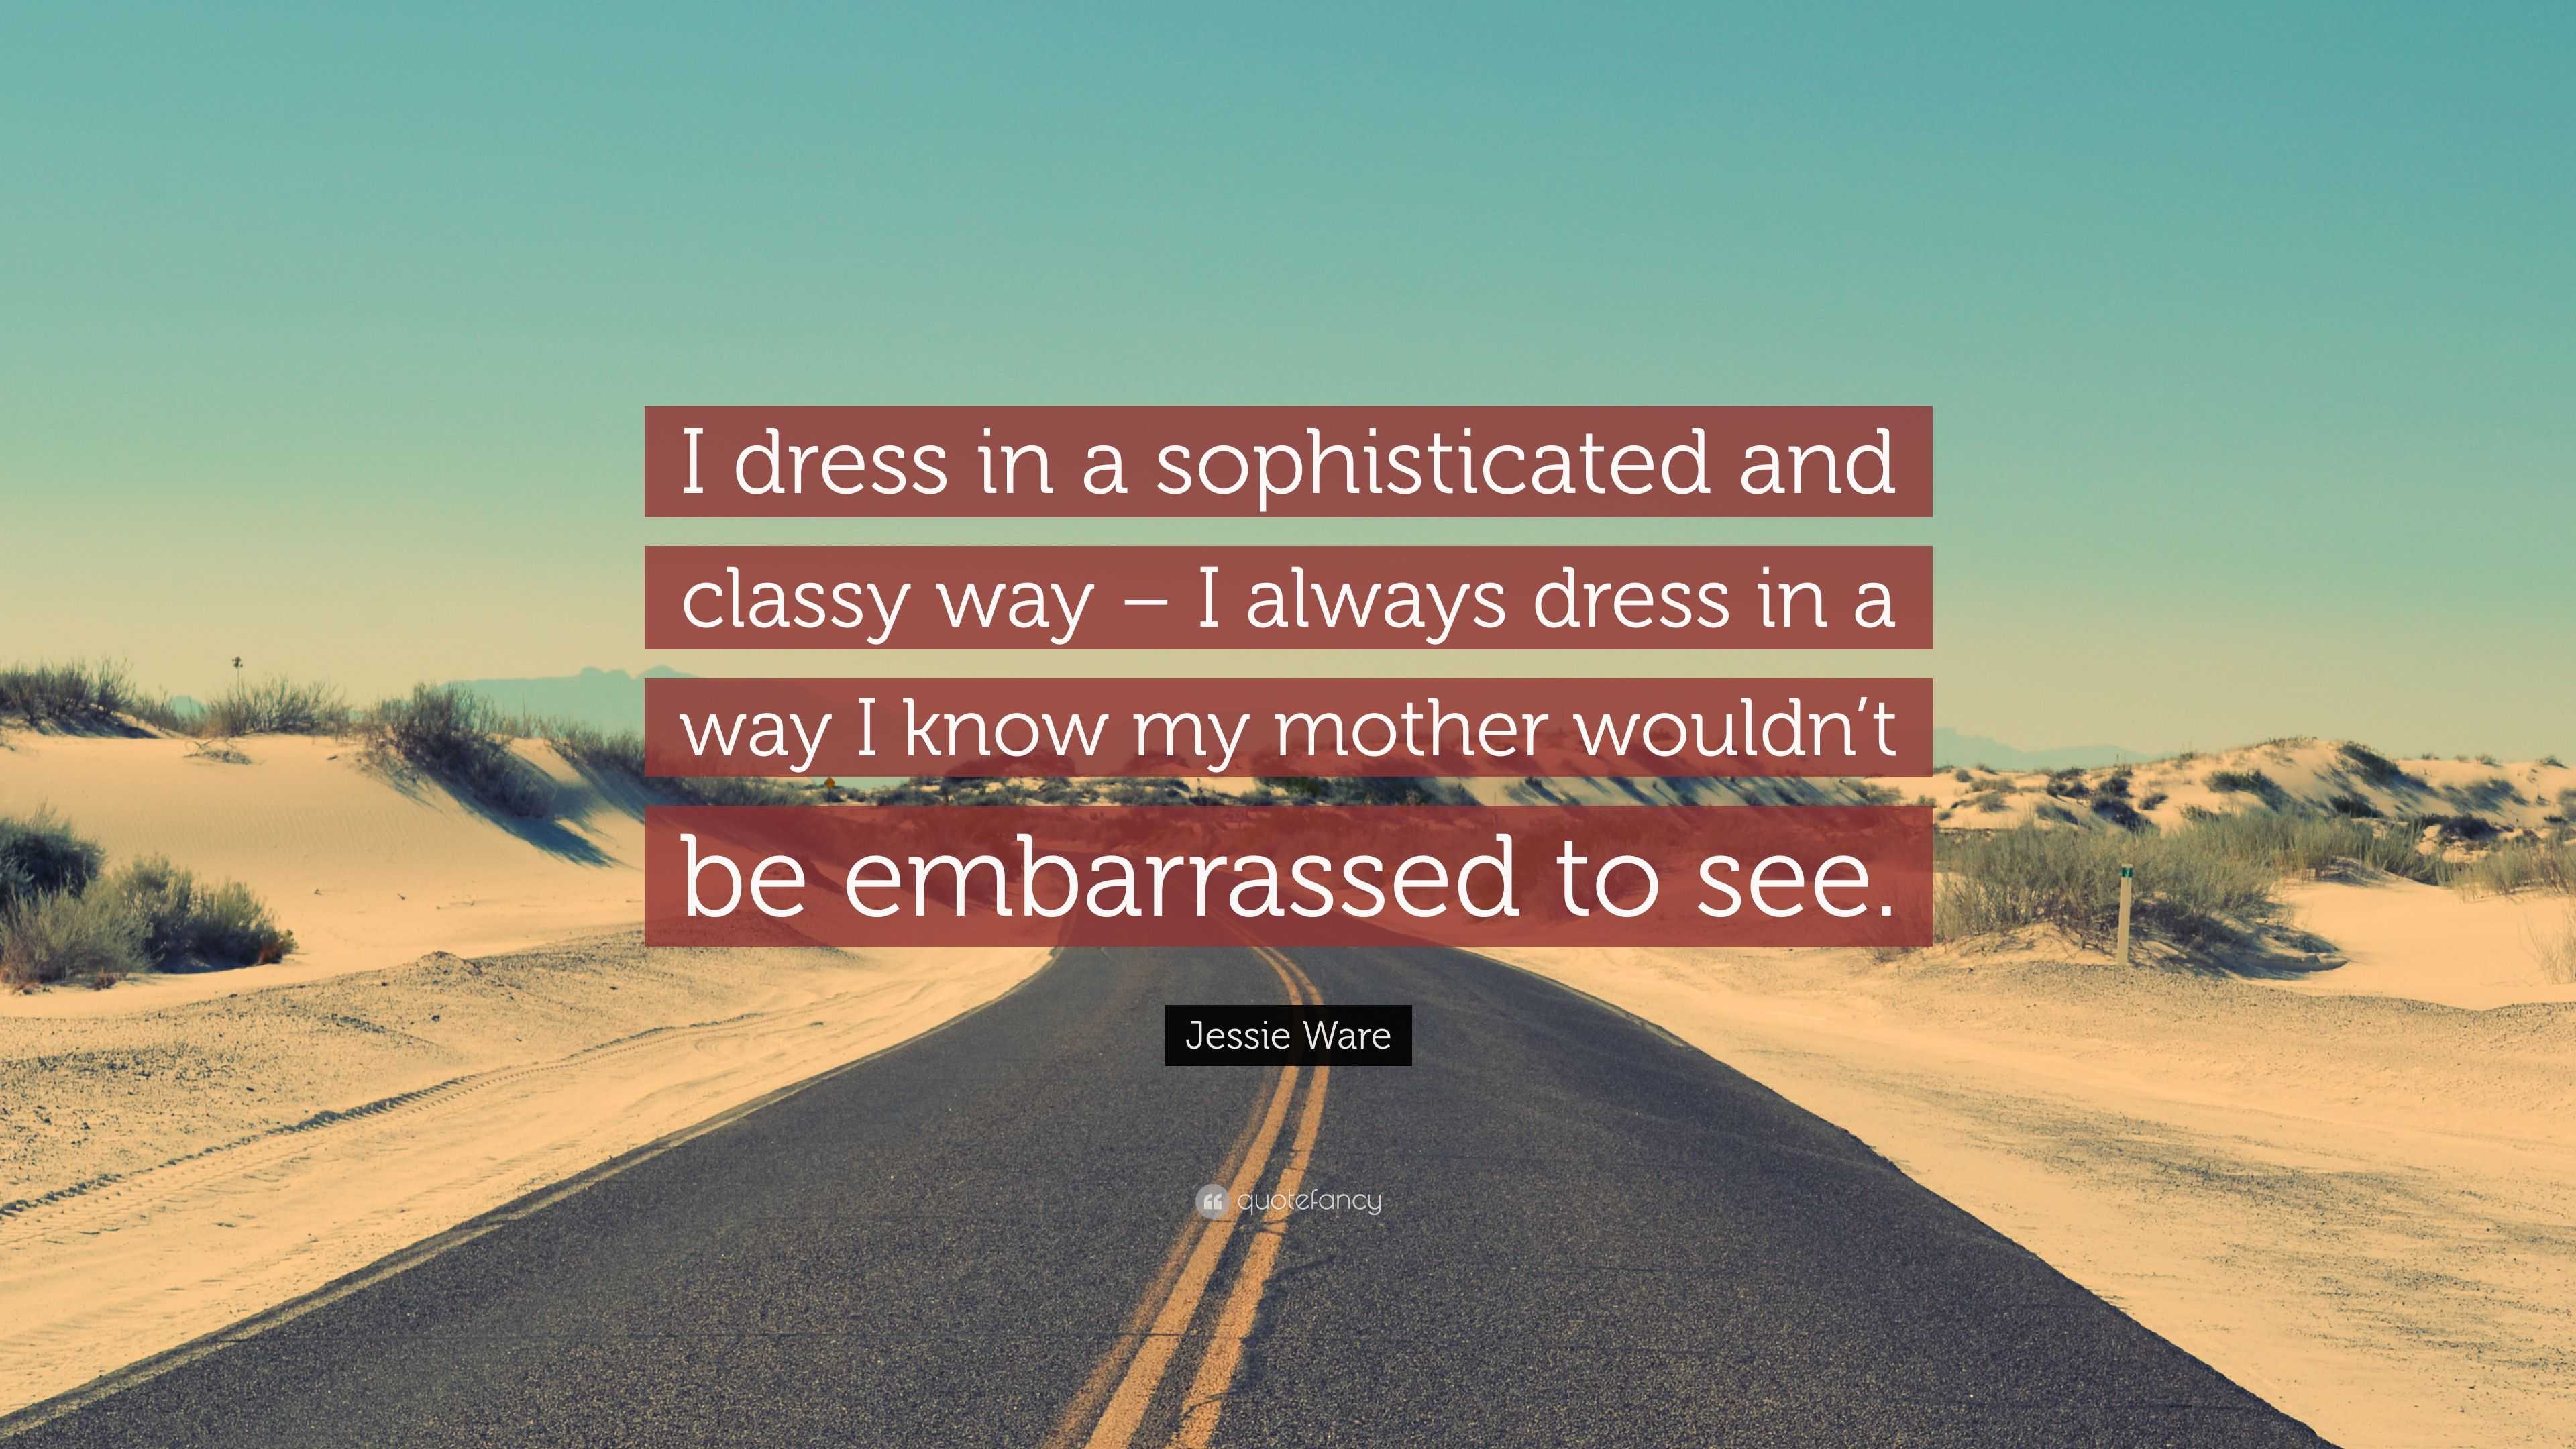 Jessie Ware Quote: “I dress in a sophisticated and classy way – I